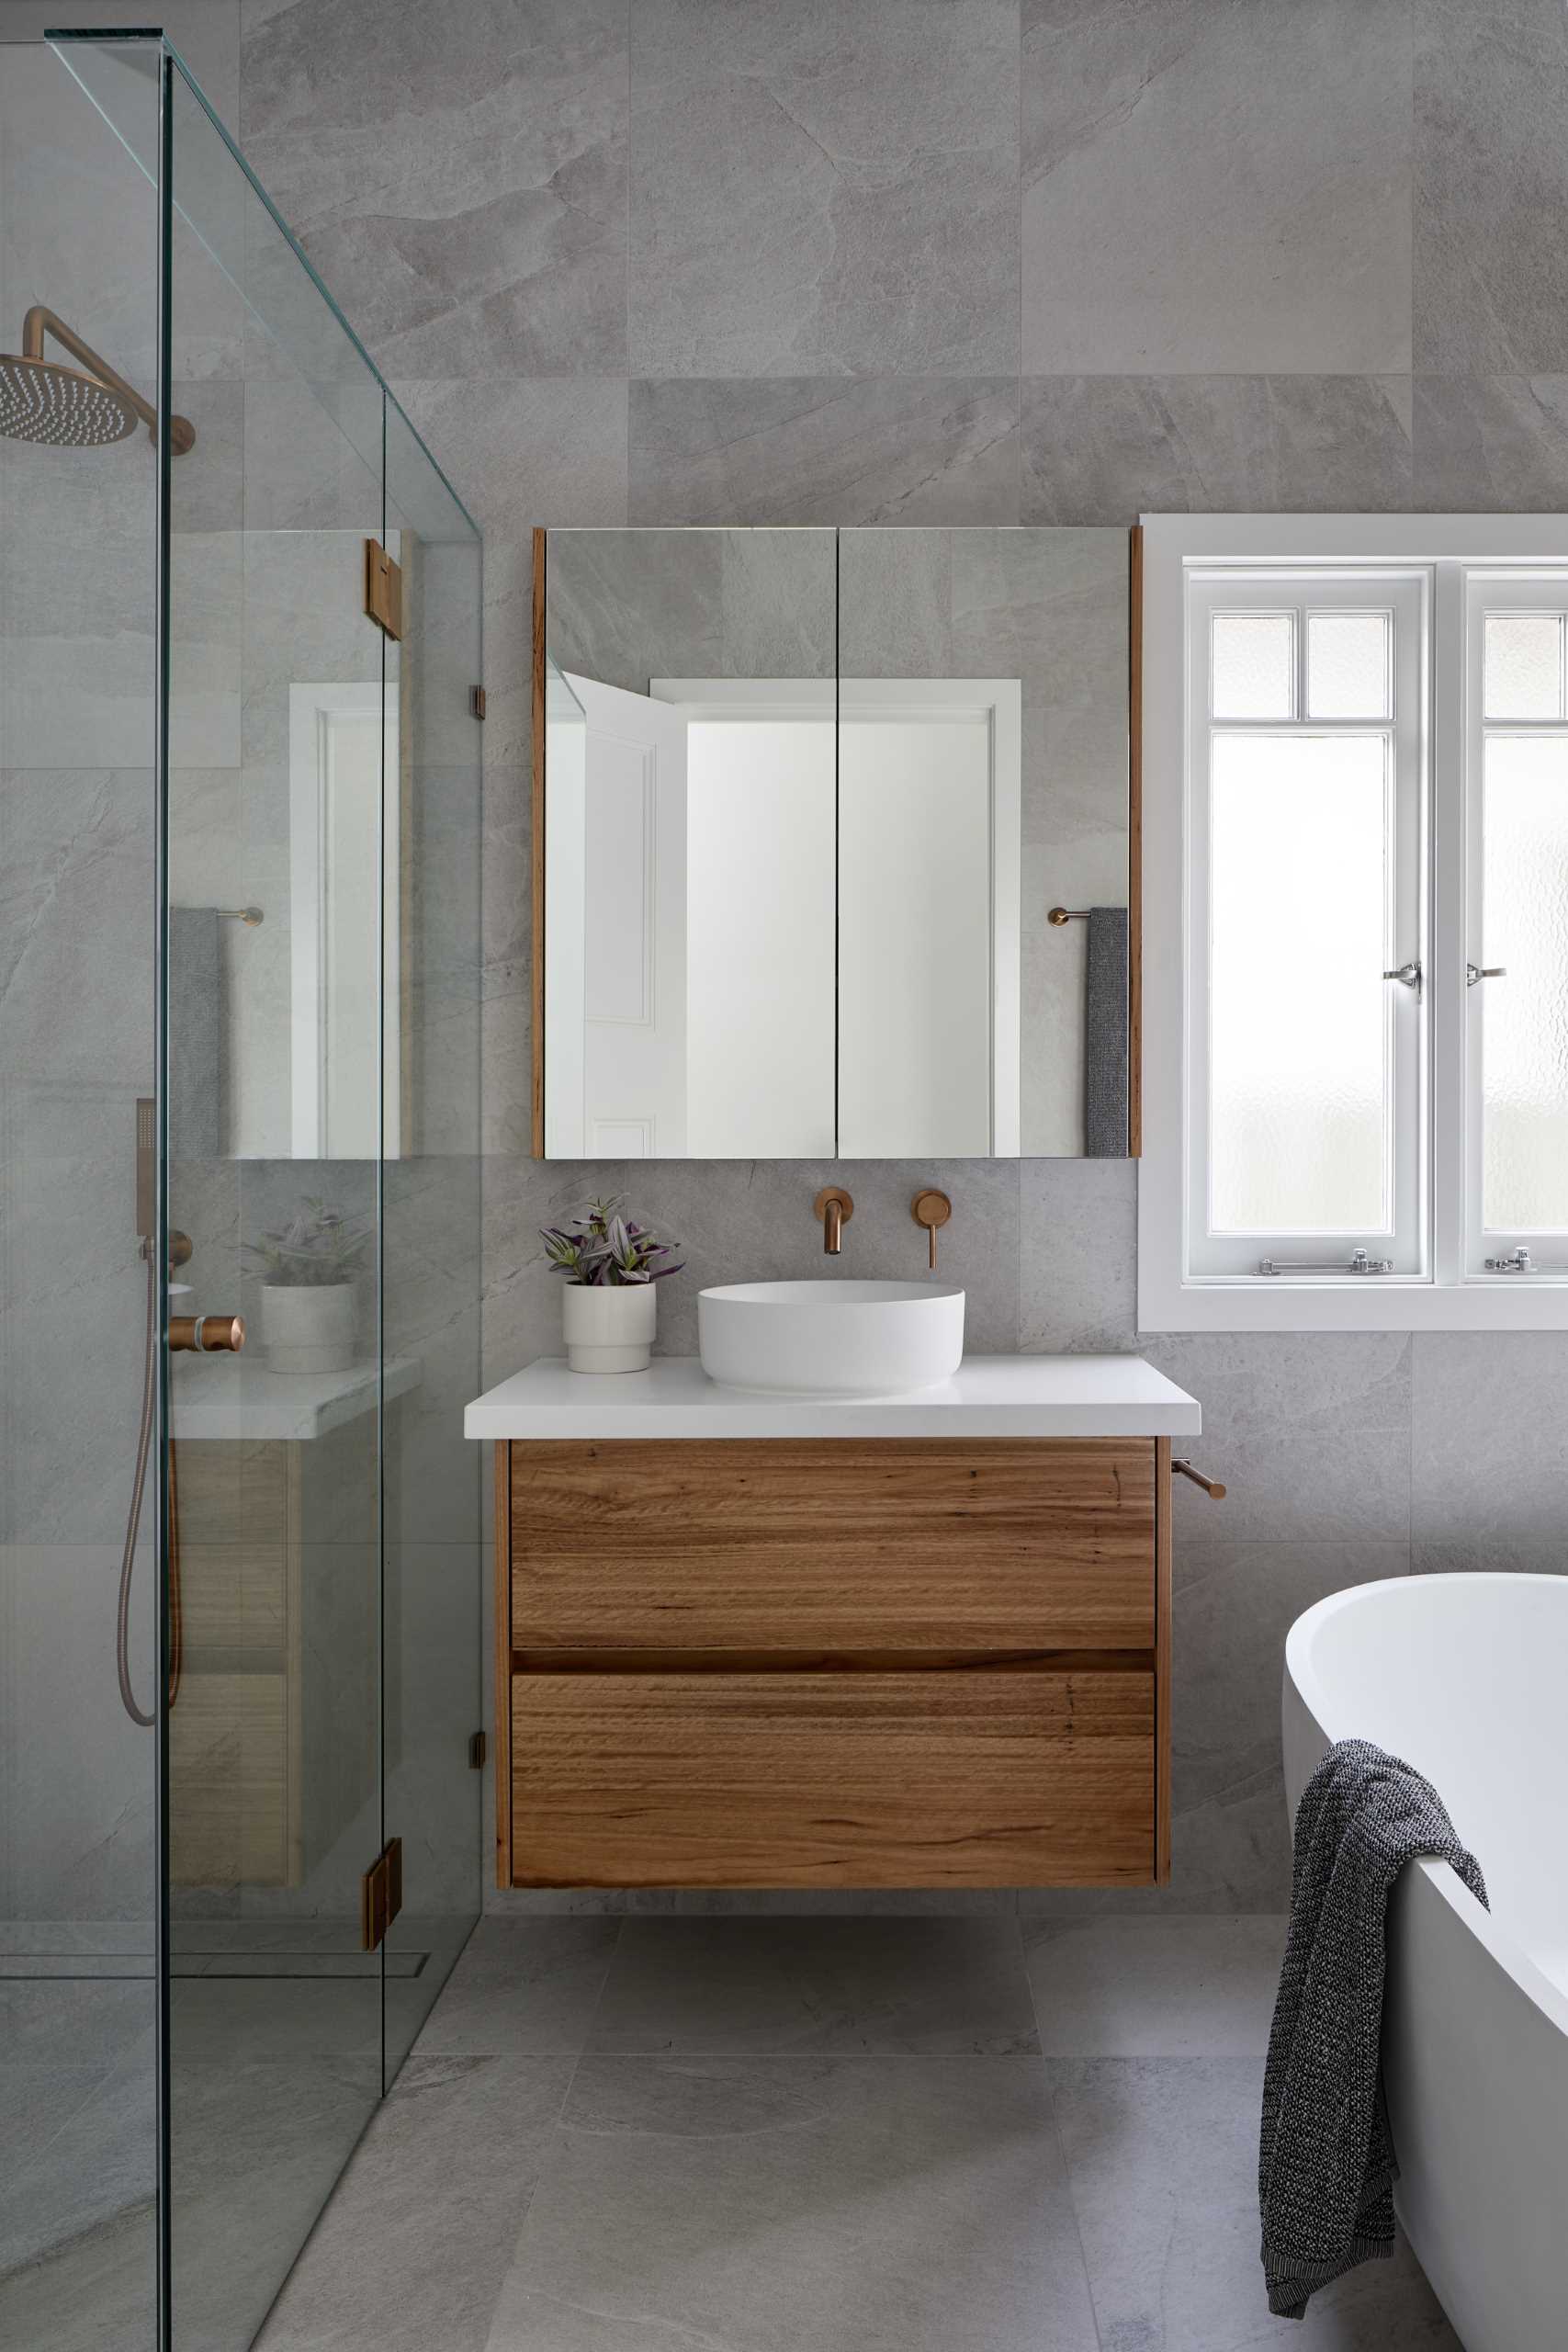 This modern en-suite bathroom has a single vanity with a glass-enclosed walk-in shower on one side and a freestanding bathtub with a shelving niche on the other.